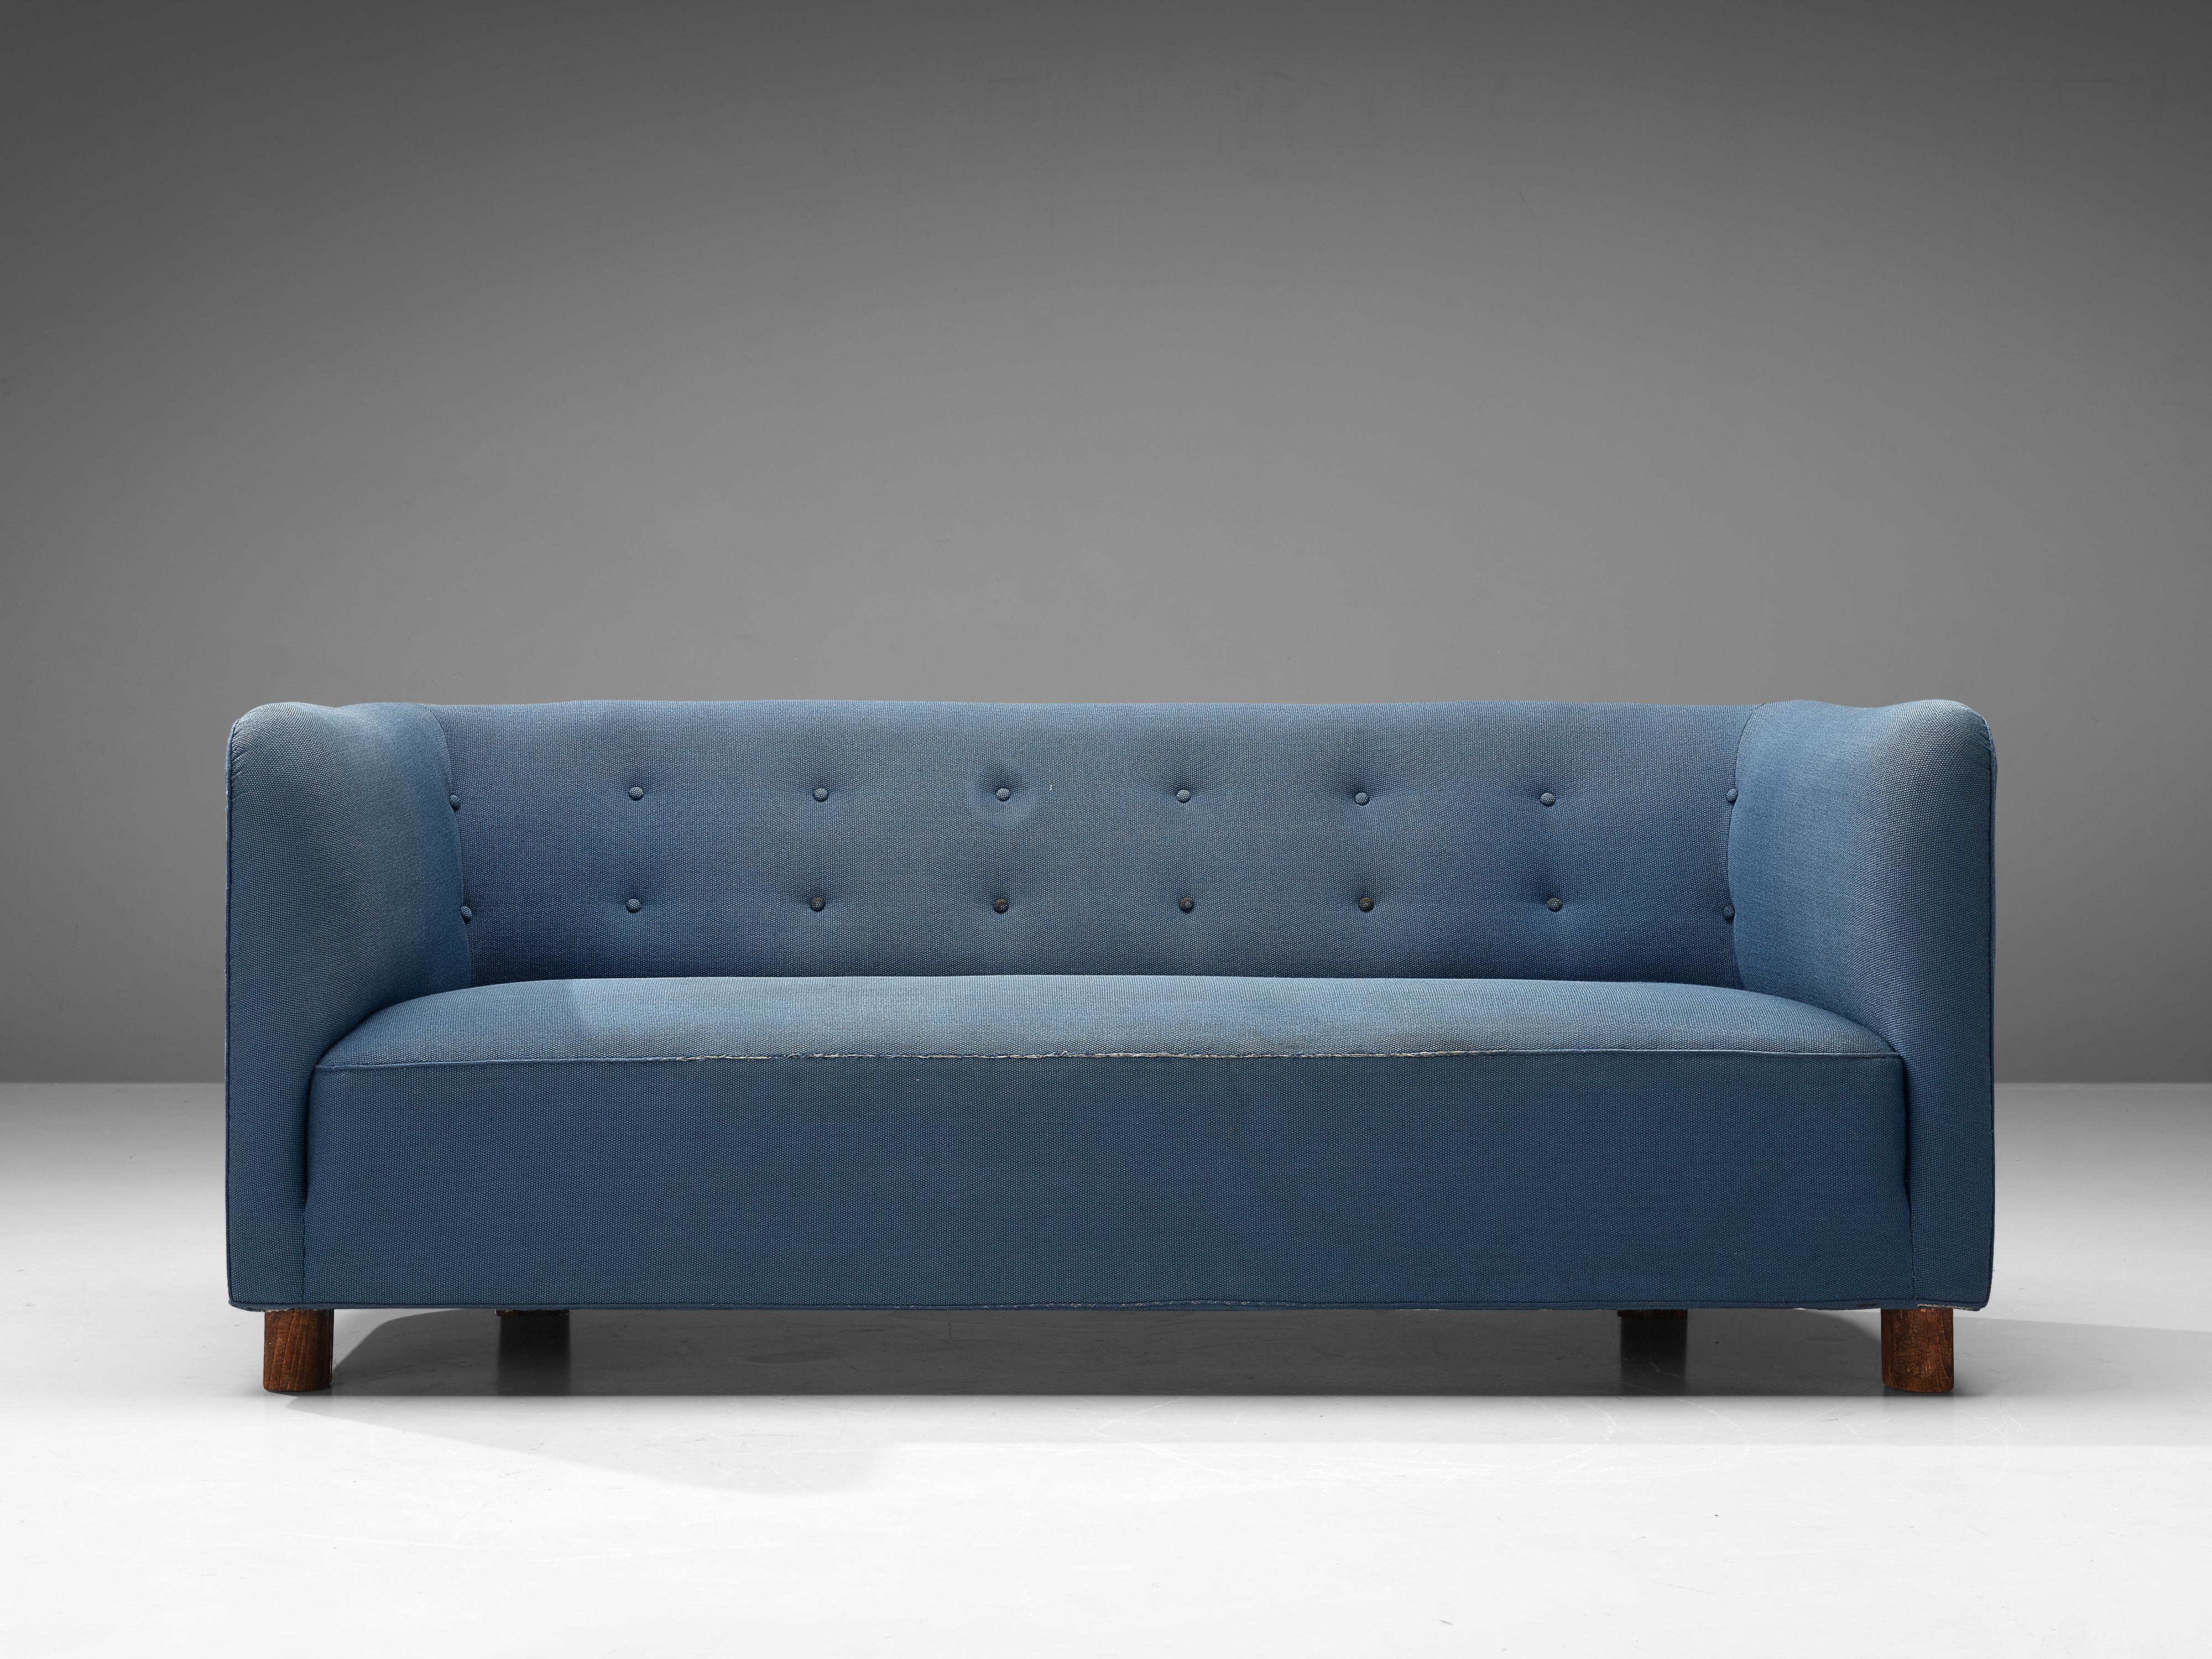 Danish sofa, upholstery, wood, Denmark, 1960s

Cubic Danish sofa in blue upholstery. The low backrest flows into the armrests on the same height. The backrest features tufted details. Please note that the back of the sofa is not finished with the